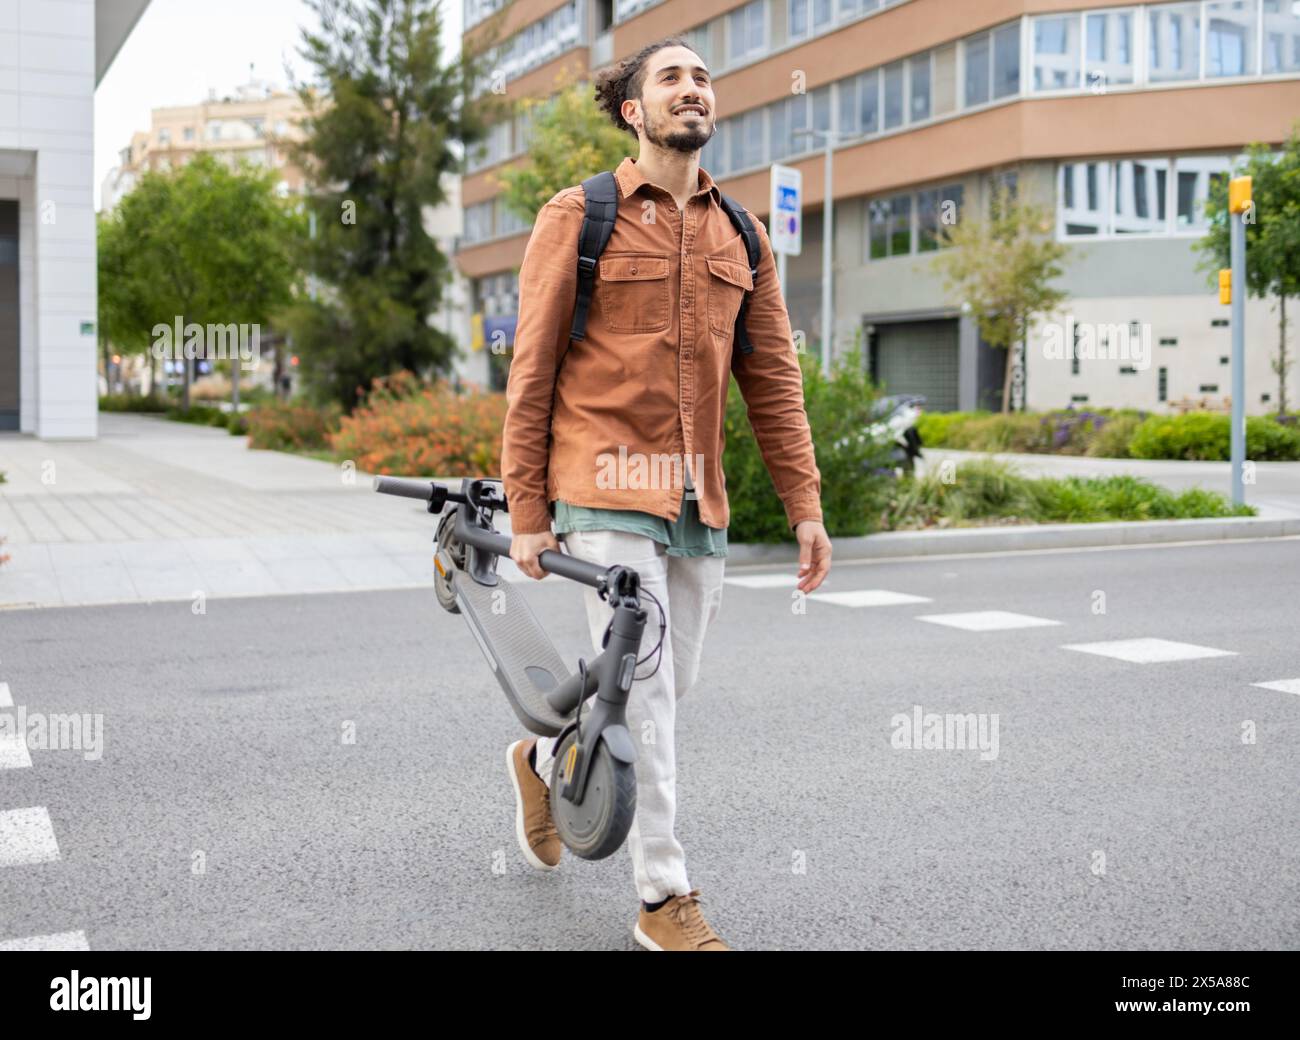 A young man is captured walking cheerfully with his electric scooter in hand, on a modern city sidewalk, epitomizing urban mobility and a sustainable Stock Photo